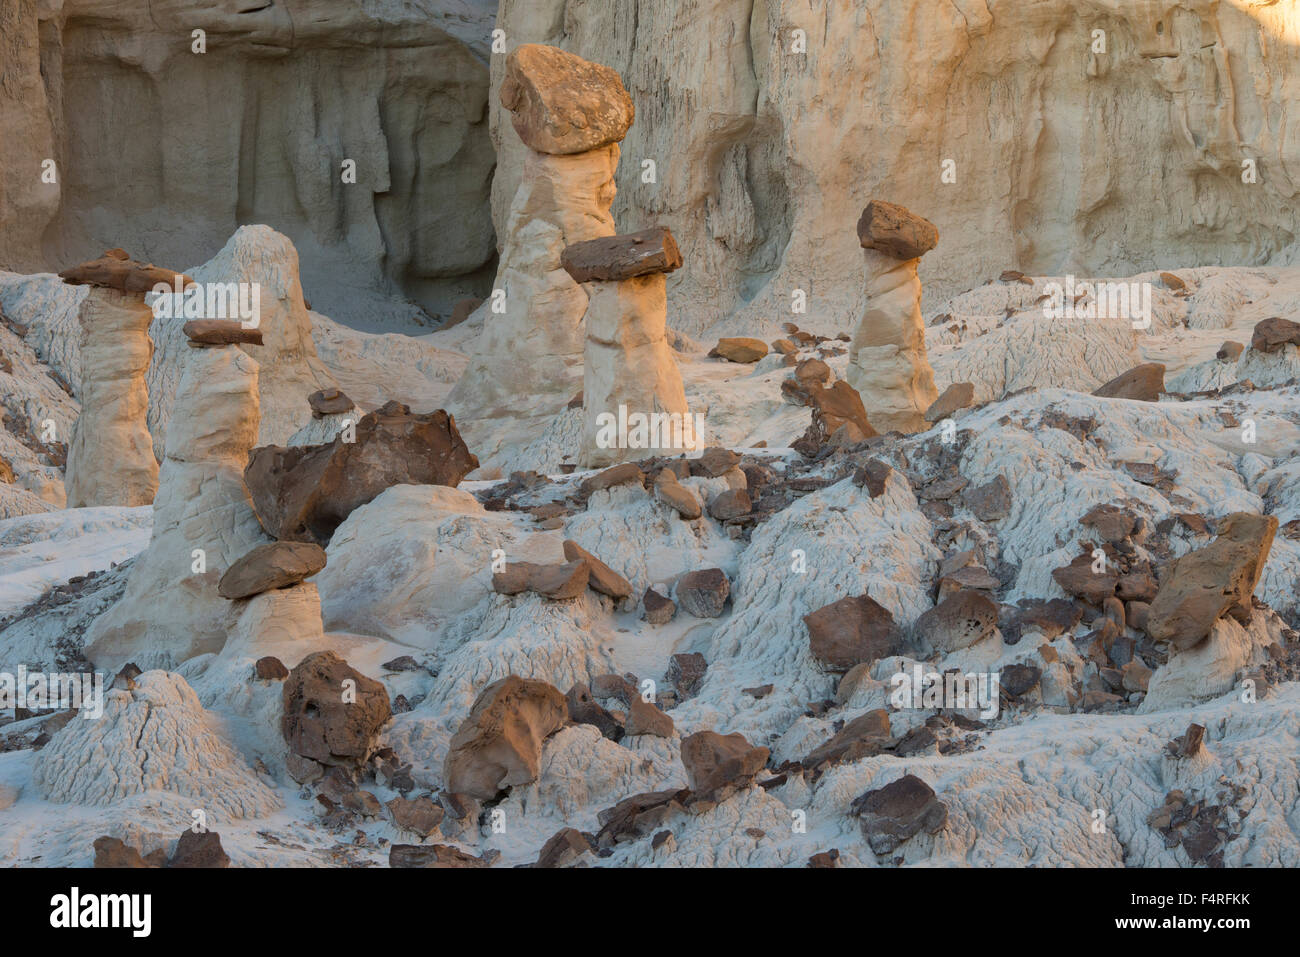 USA, Utah, Grand Staircase Escalante National Monument, Toadstools, Banque D'Images